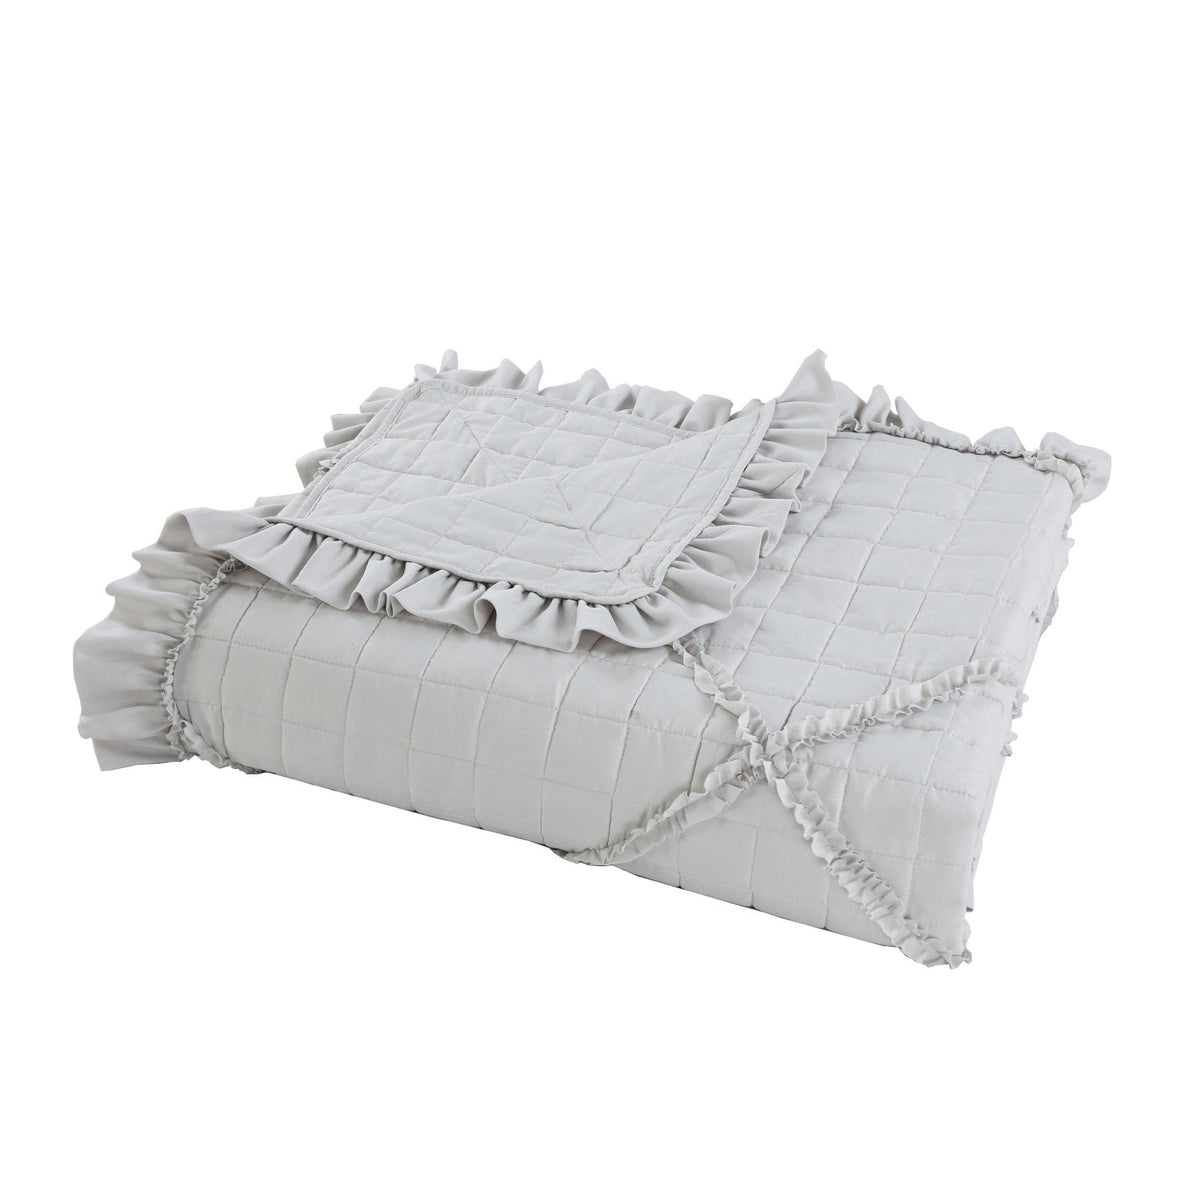 Lush Ruffled Textured Shabby Chic Embroidered Stitching Coverlet Bedspread Ultra Soft Solid 3 Piece Summer Quilt Set, Light Grey